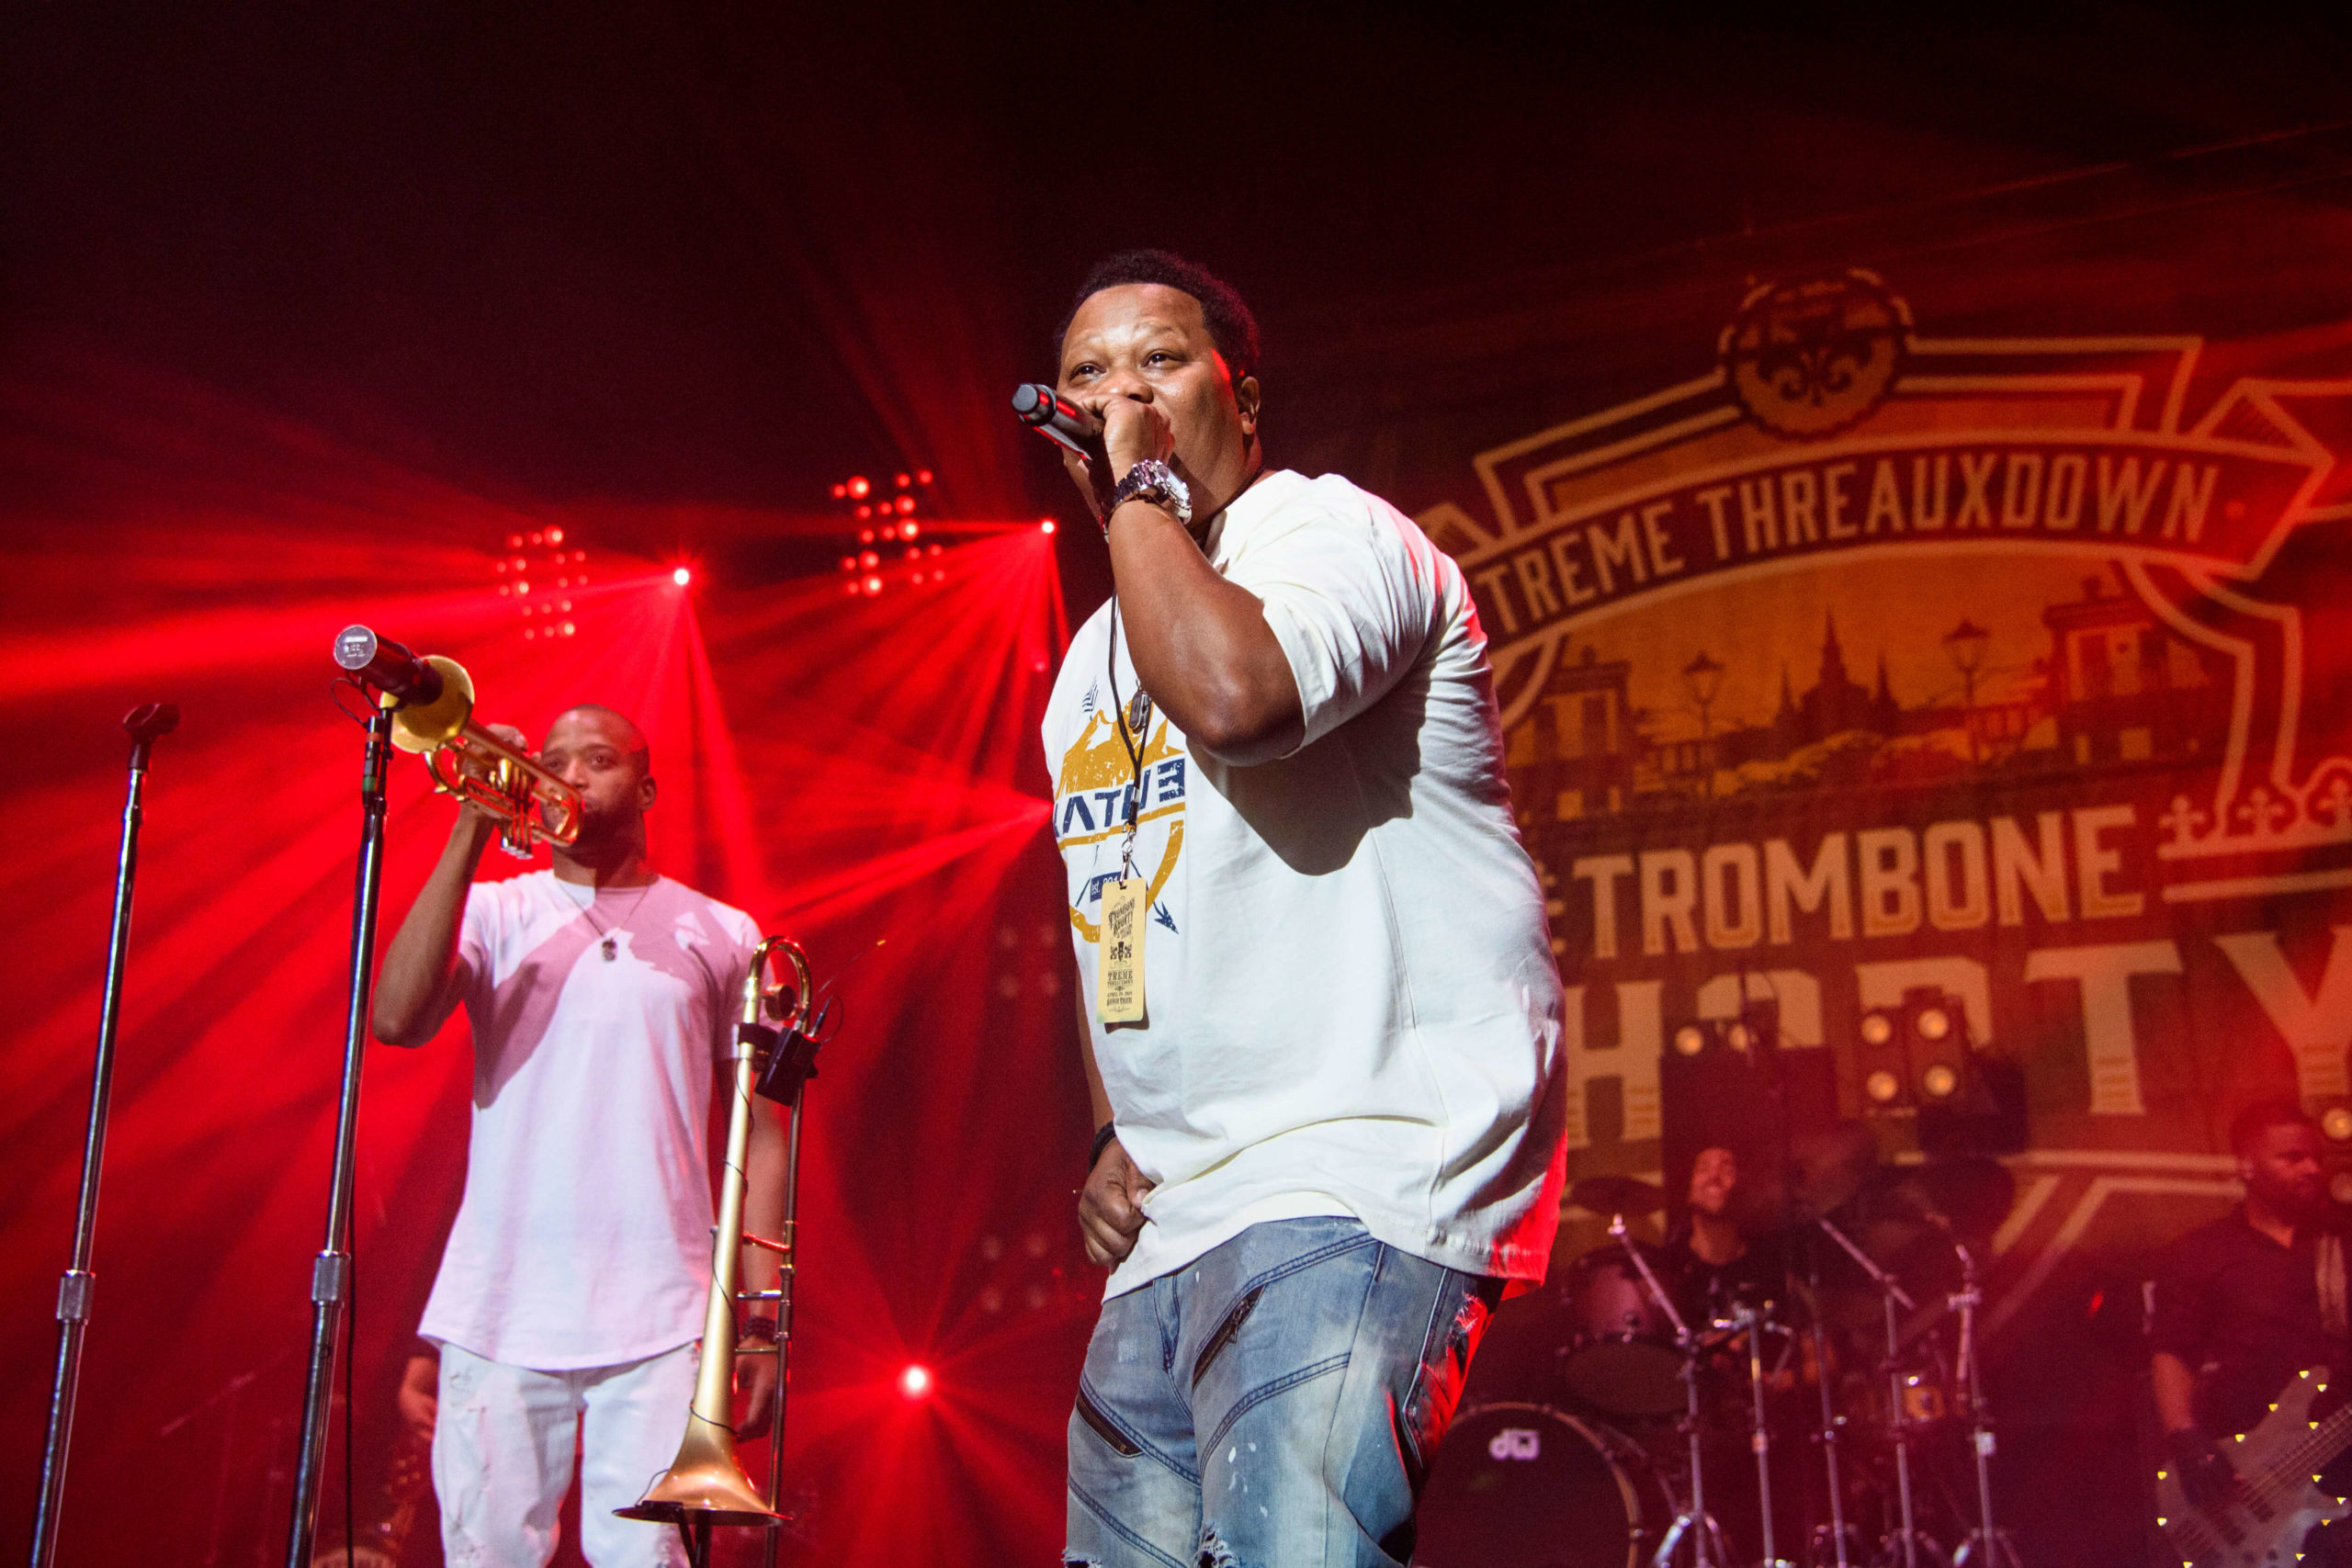 NEW ORLEANS, LA - APRIL 28:  Troy Andrews (L) and Mannie Fresh perform during Trombone Shorty's Treme Threauxdown at Saenger Theatre on April 28, 2018 in New Orleans, Louisiana.  (Photo by Erika Goldring/Getty Images)